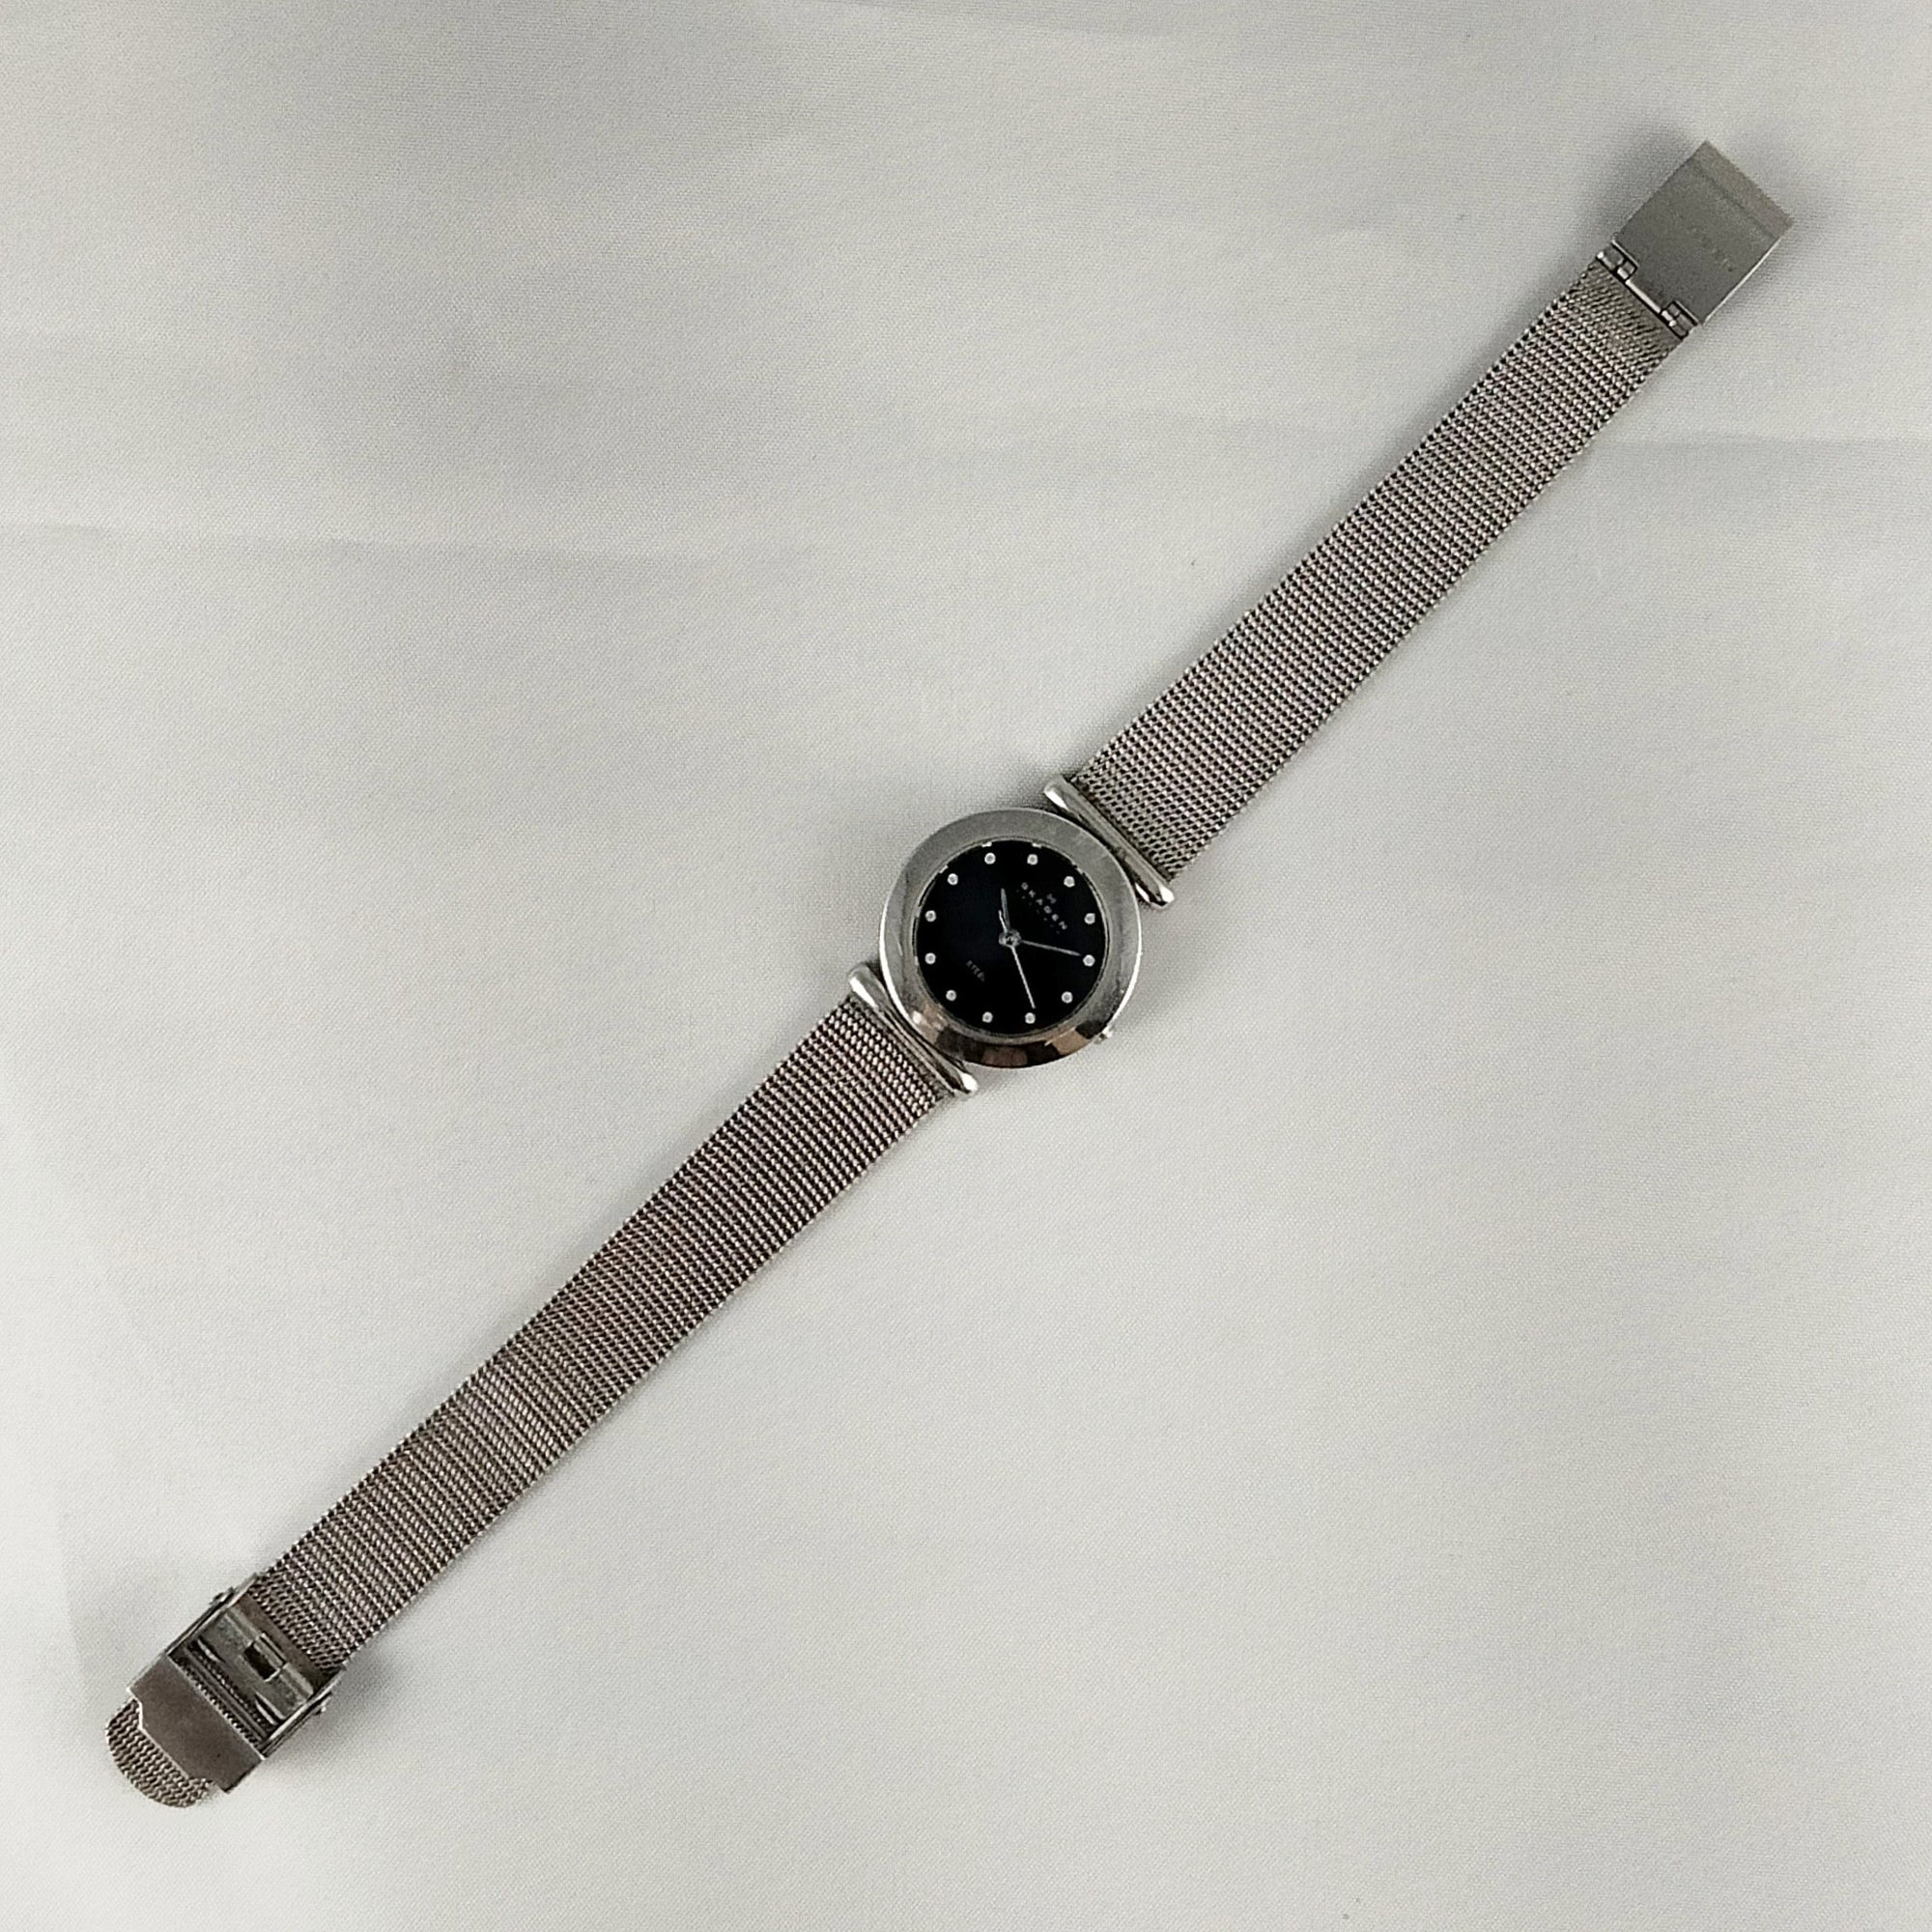 I Like Mikes Mid Century Modern Watches Skagen Stainless Steel Women's Watch, Black Dial with Jewel Hour Markers, Mesh Strap